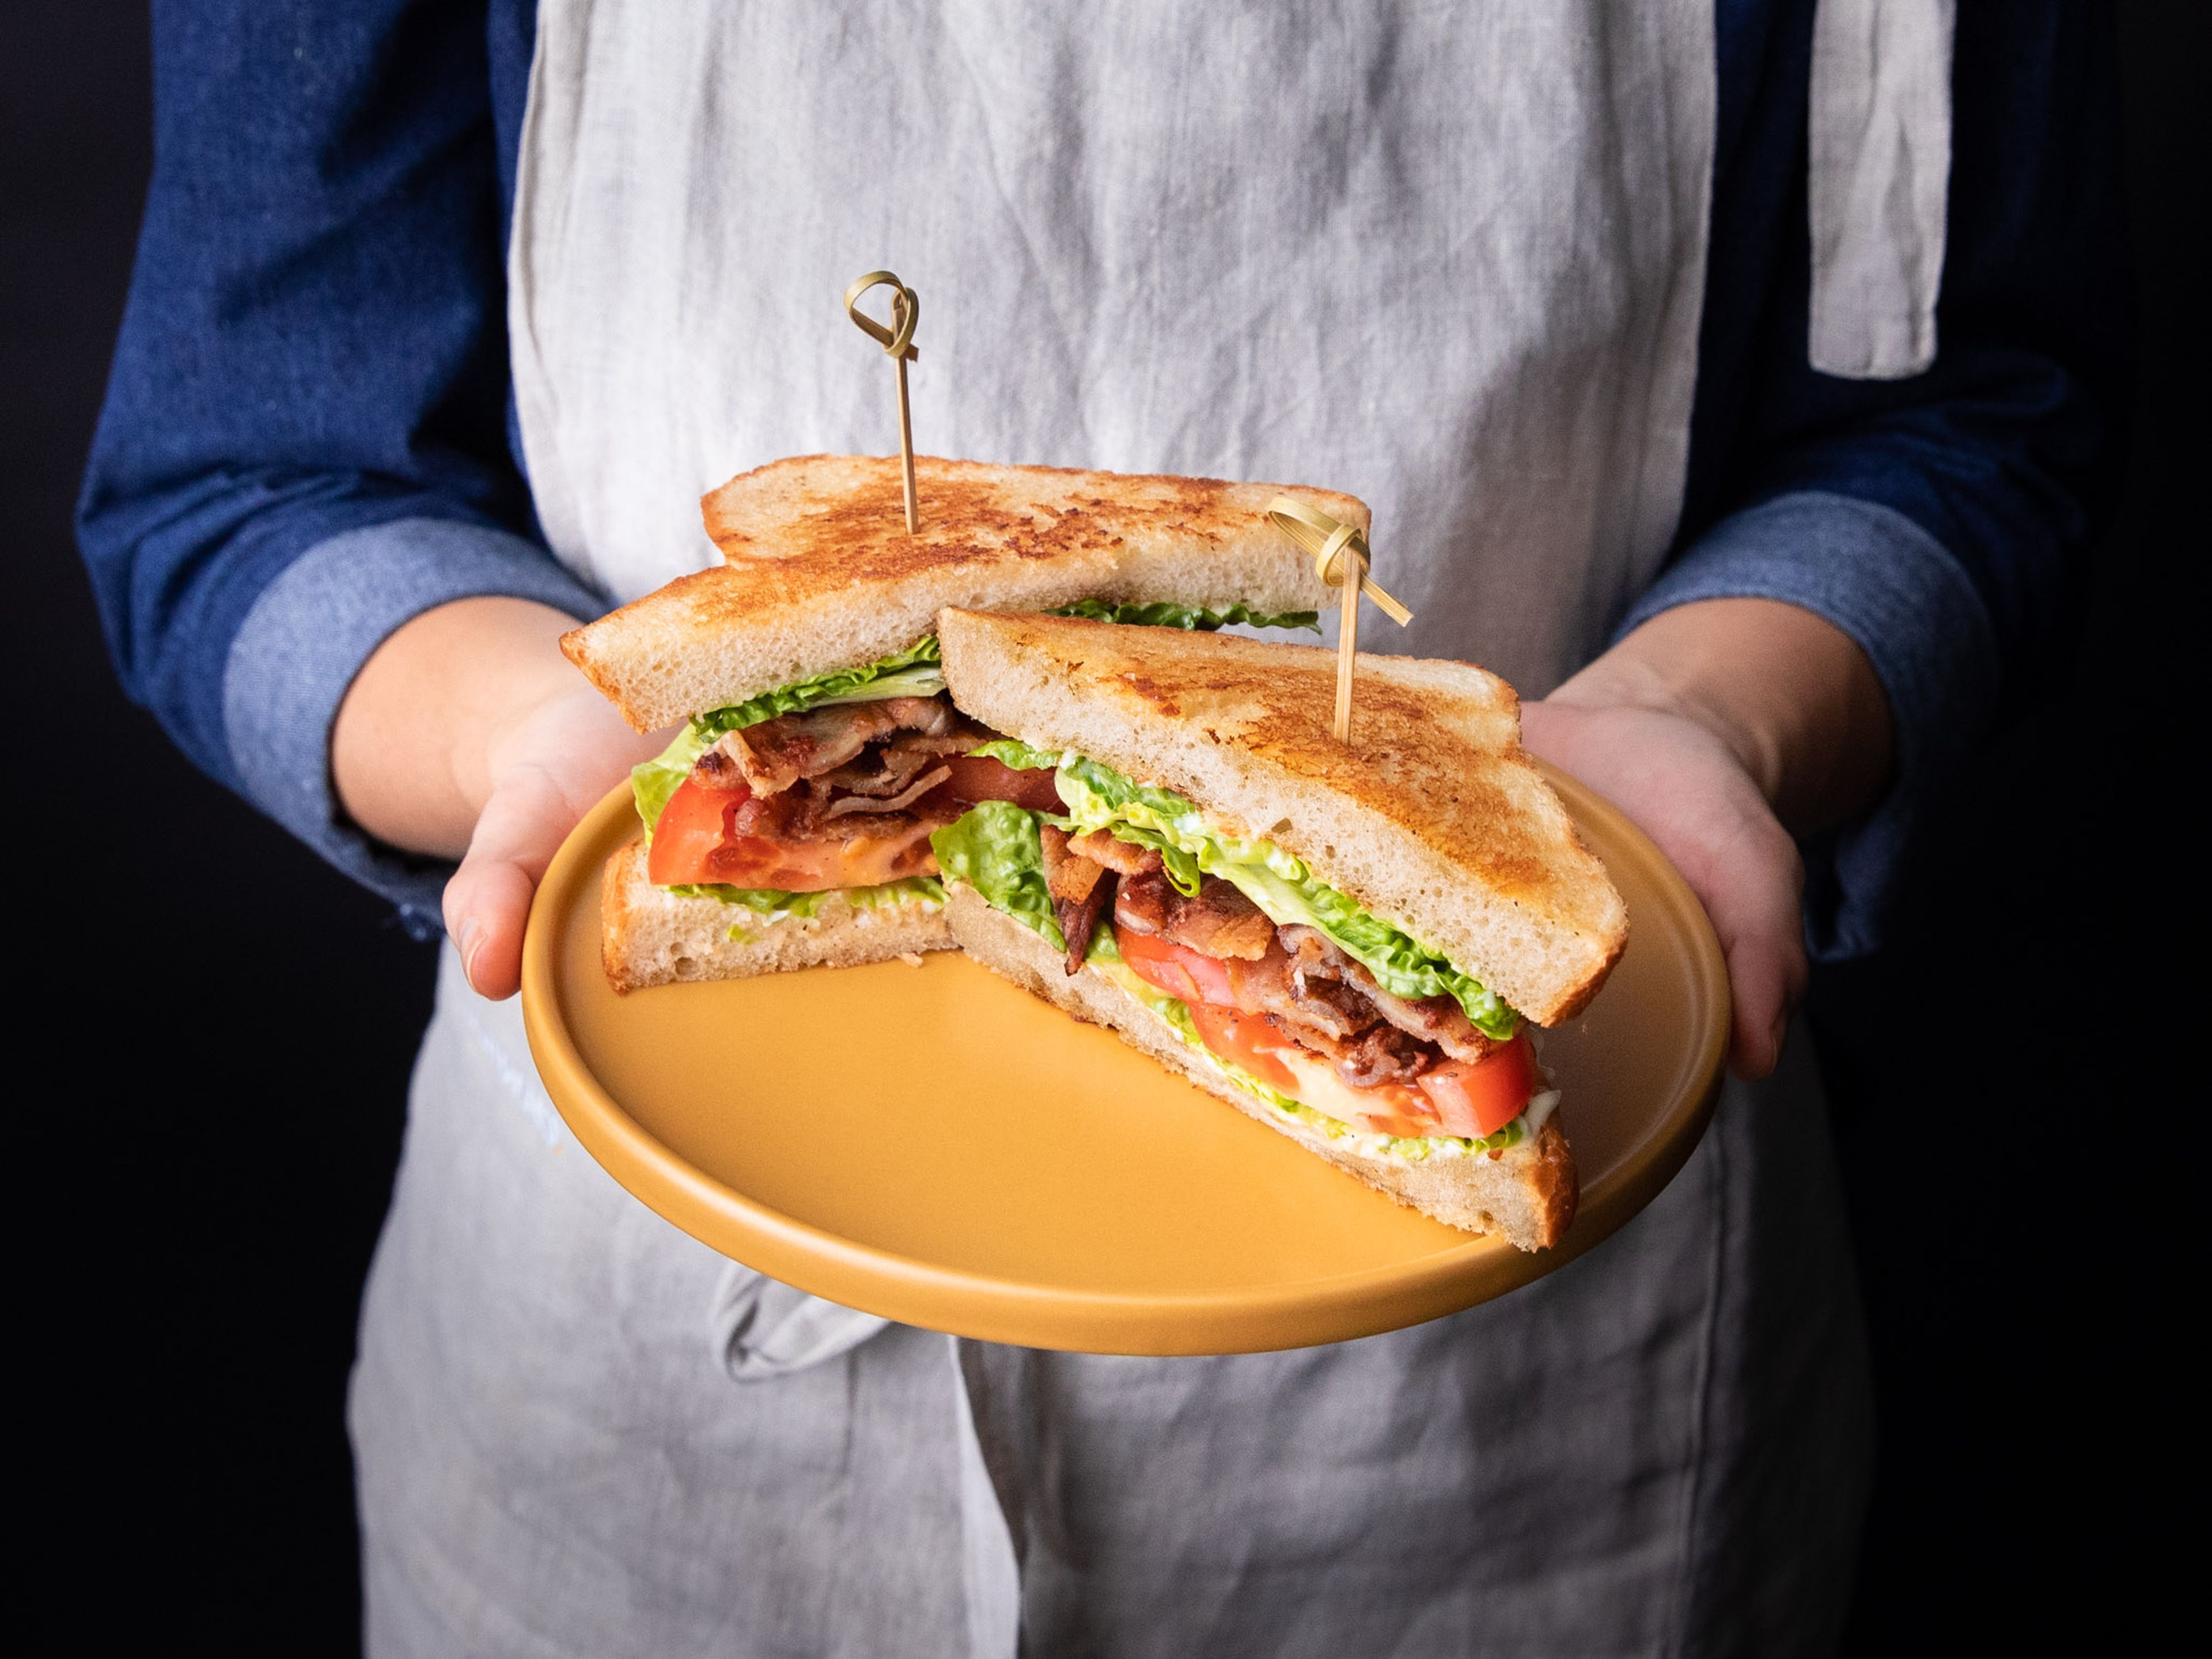 5-ingredient classic BLT (Bacon, lettuce, and tomato sandwich)